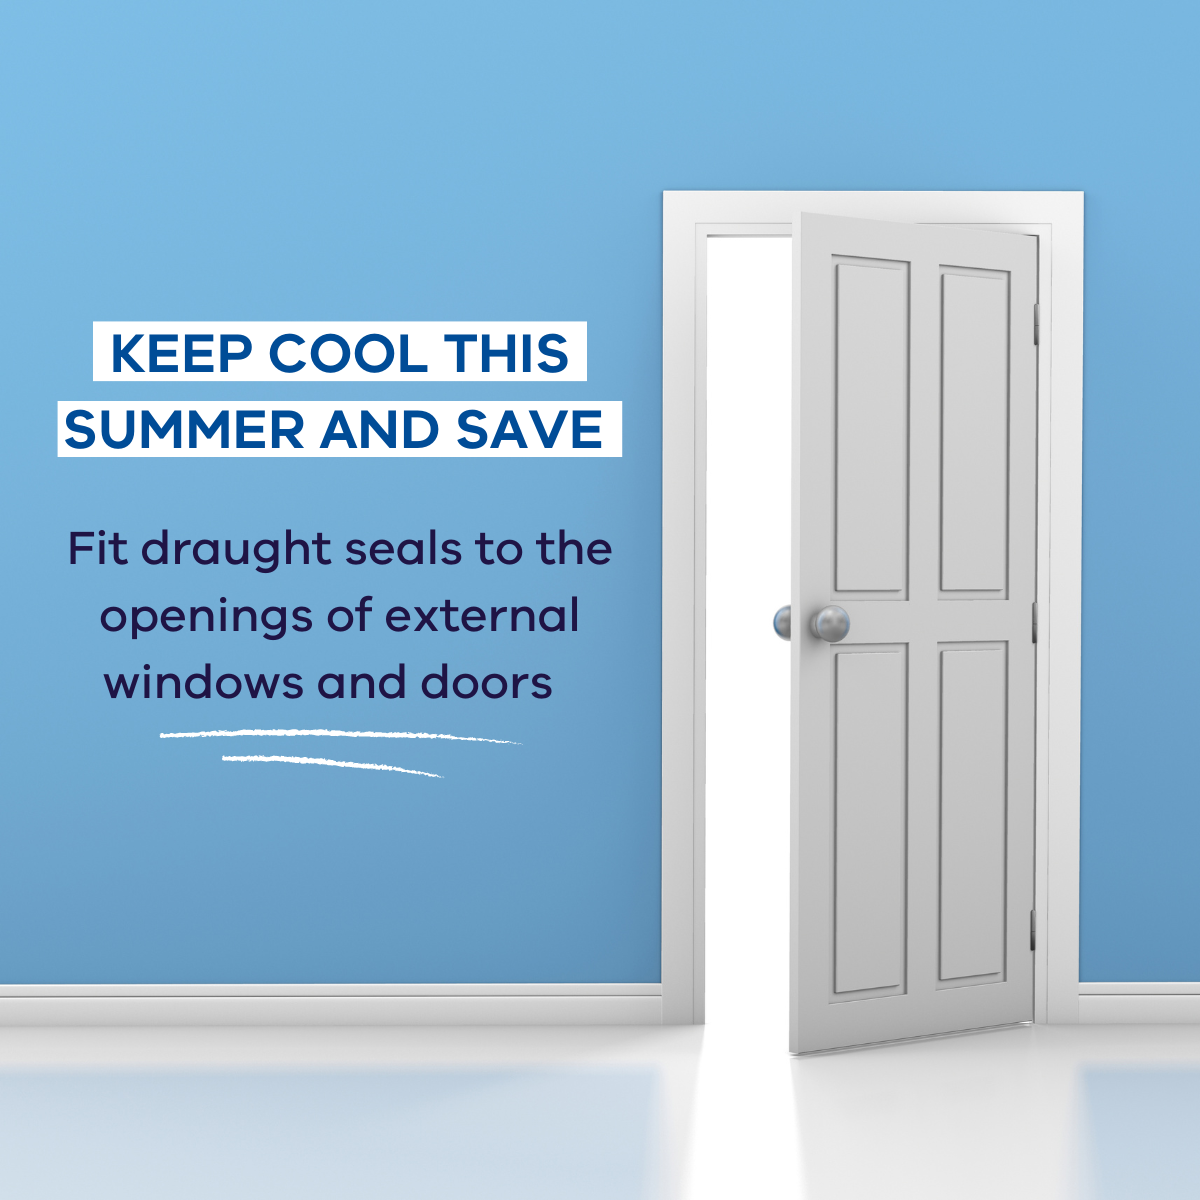 Keep cool this summer and save. Fit draught seals to the opening of external windows and doors